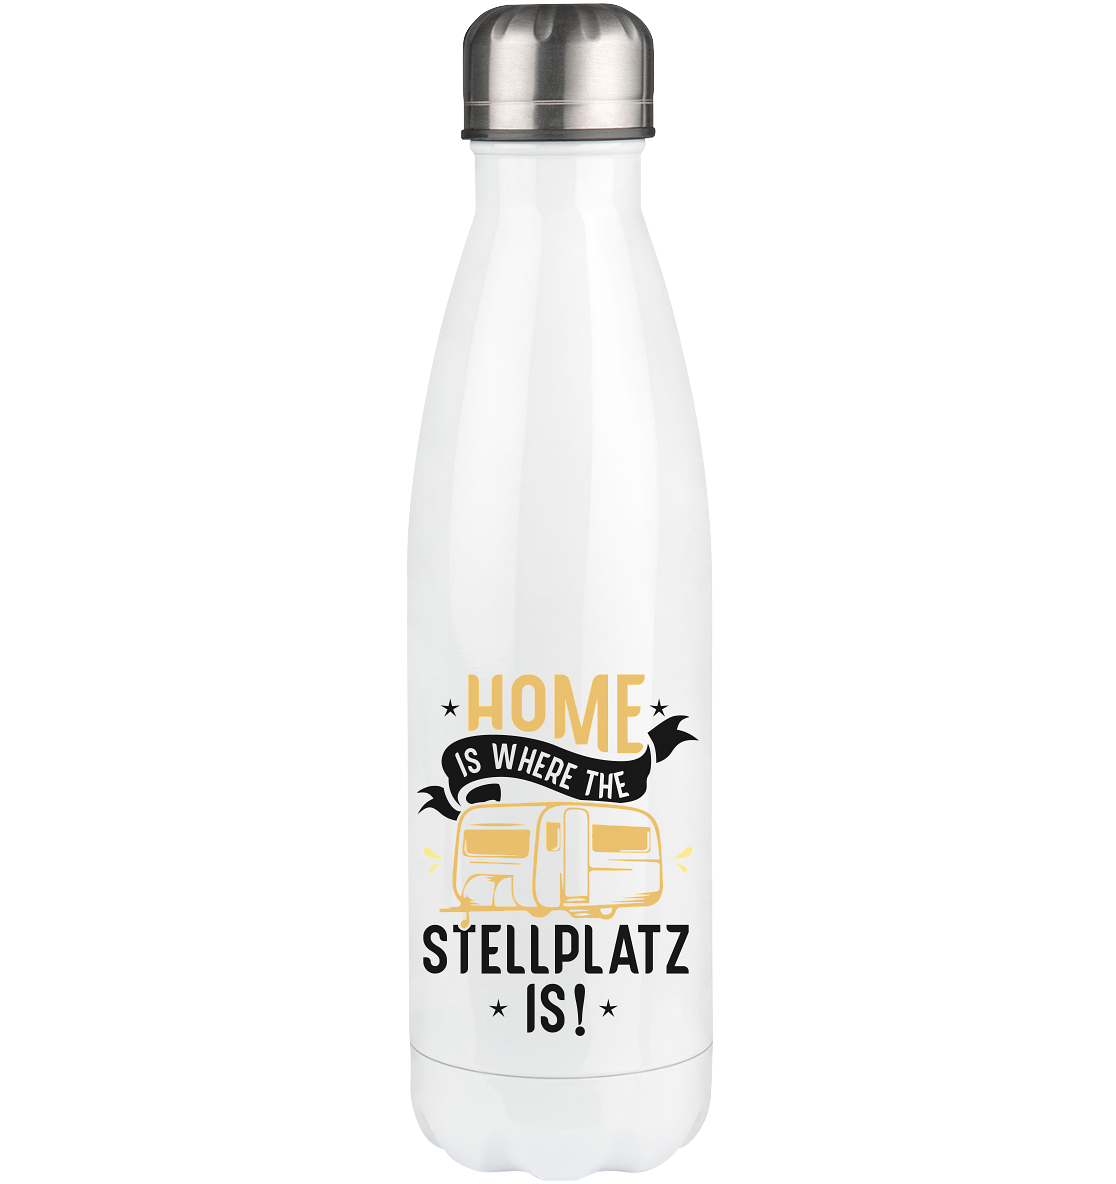 Home is where the Stellplatz is - Edelstahl Thermosflasche camping 500ml